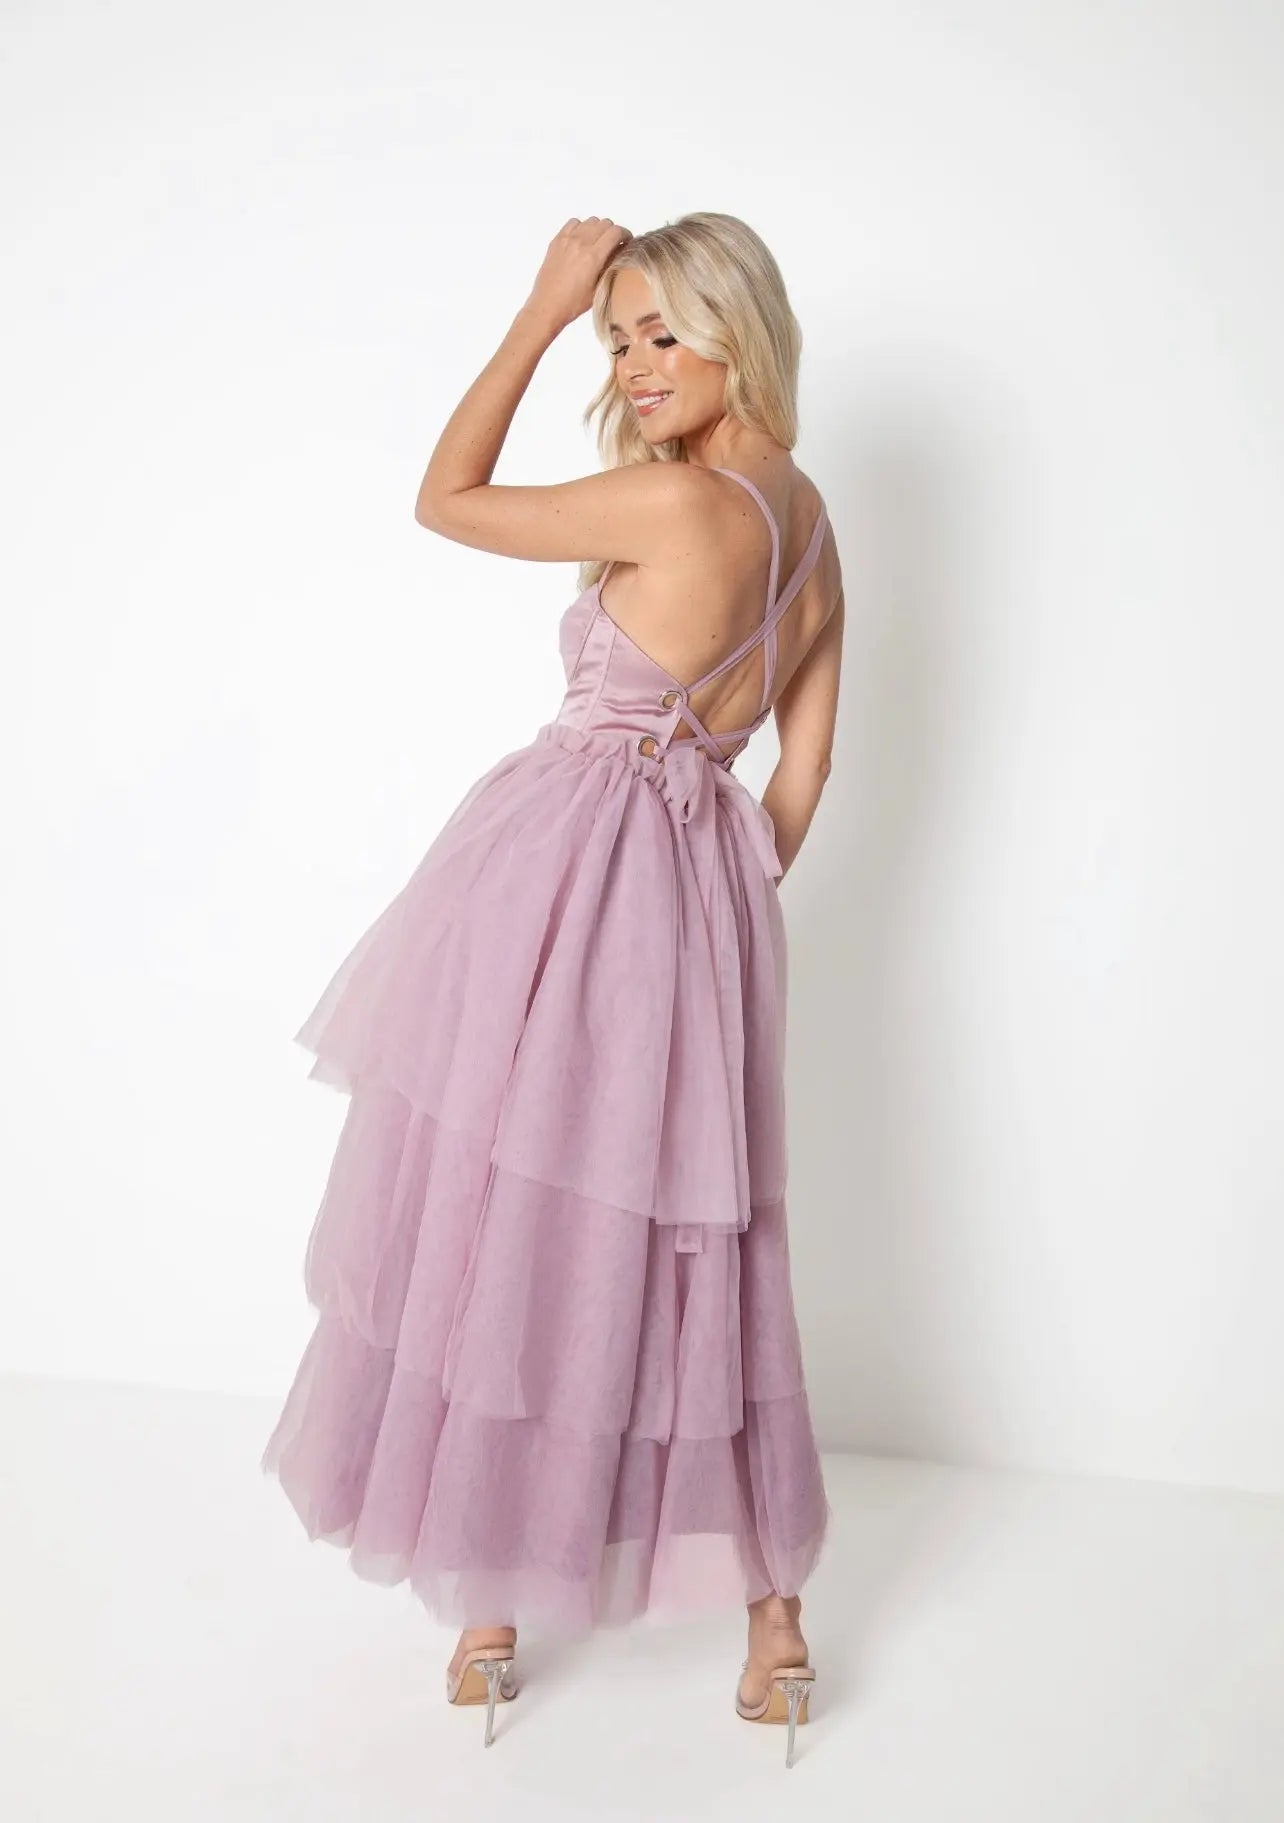 Buy Fairy Tail Princess Party Wear Gown Online